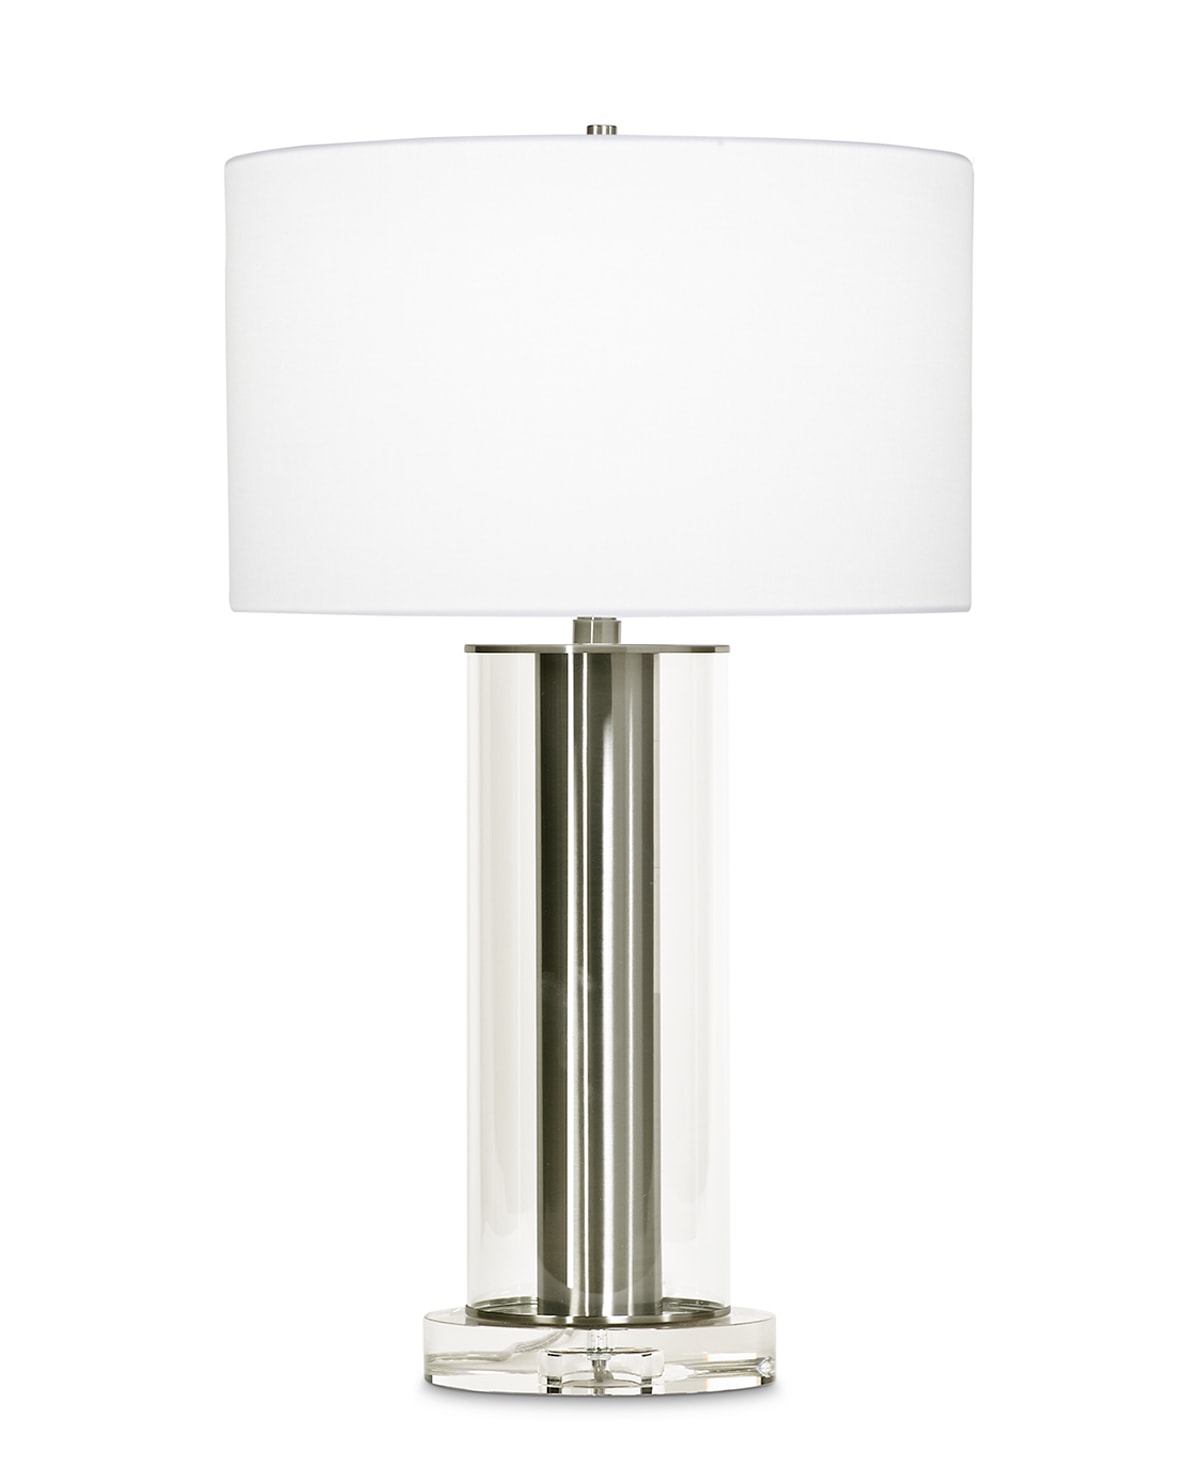 FlowDecor Lilac Table Lamp in metal with brushed nickel finish and glass and crystal and white linen drum shade (# 3701)